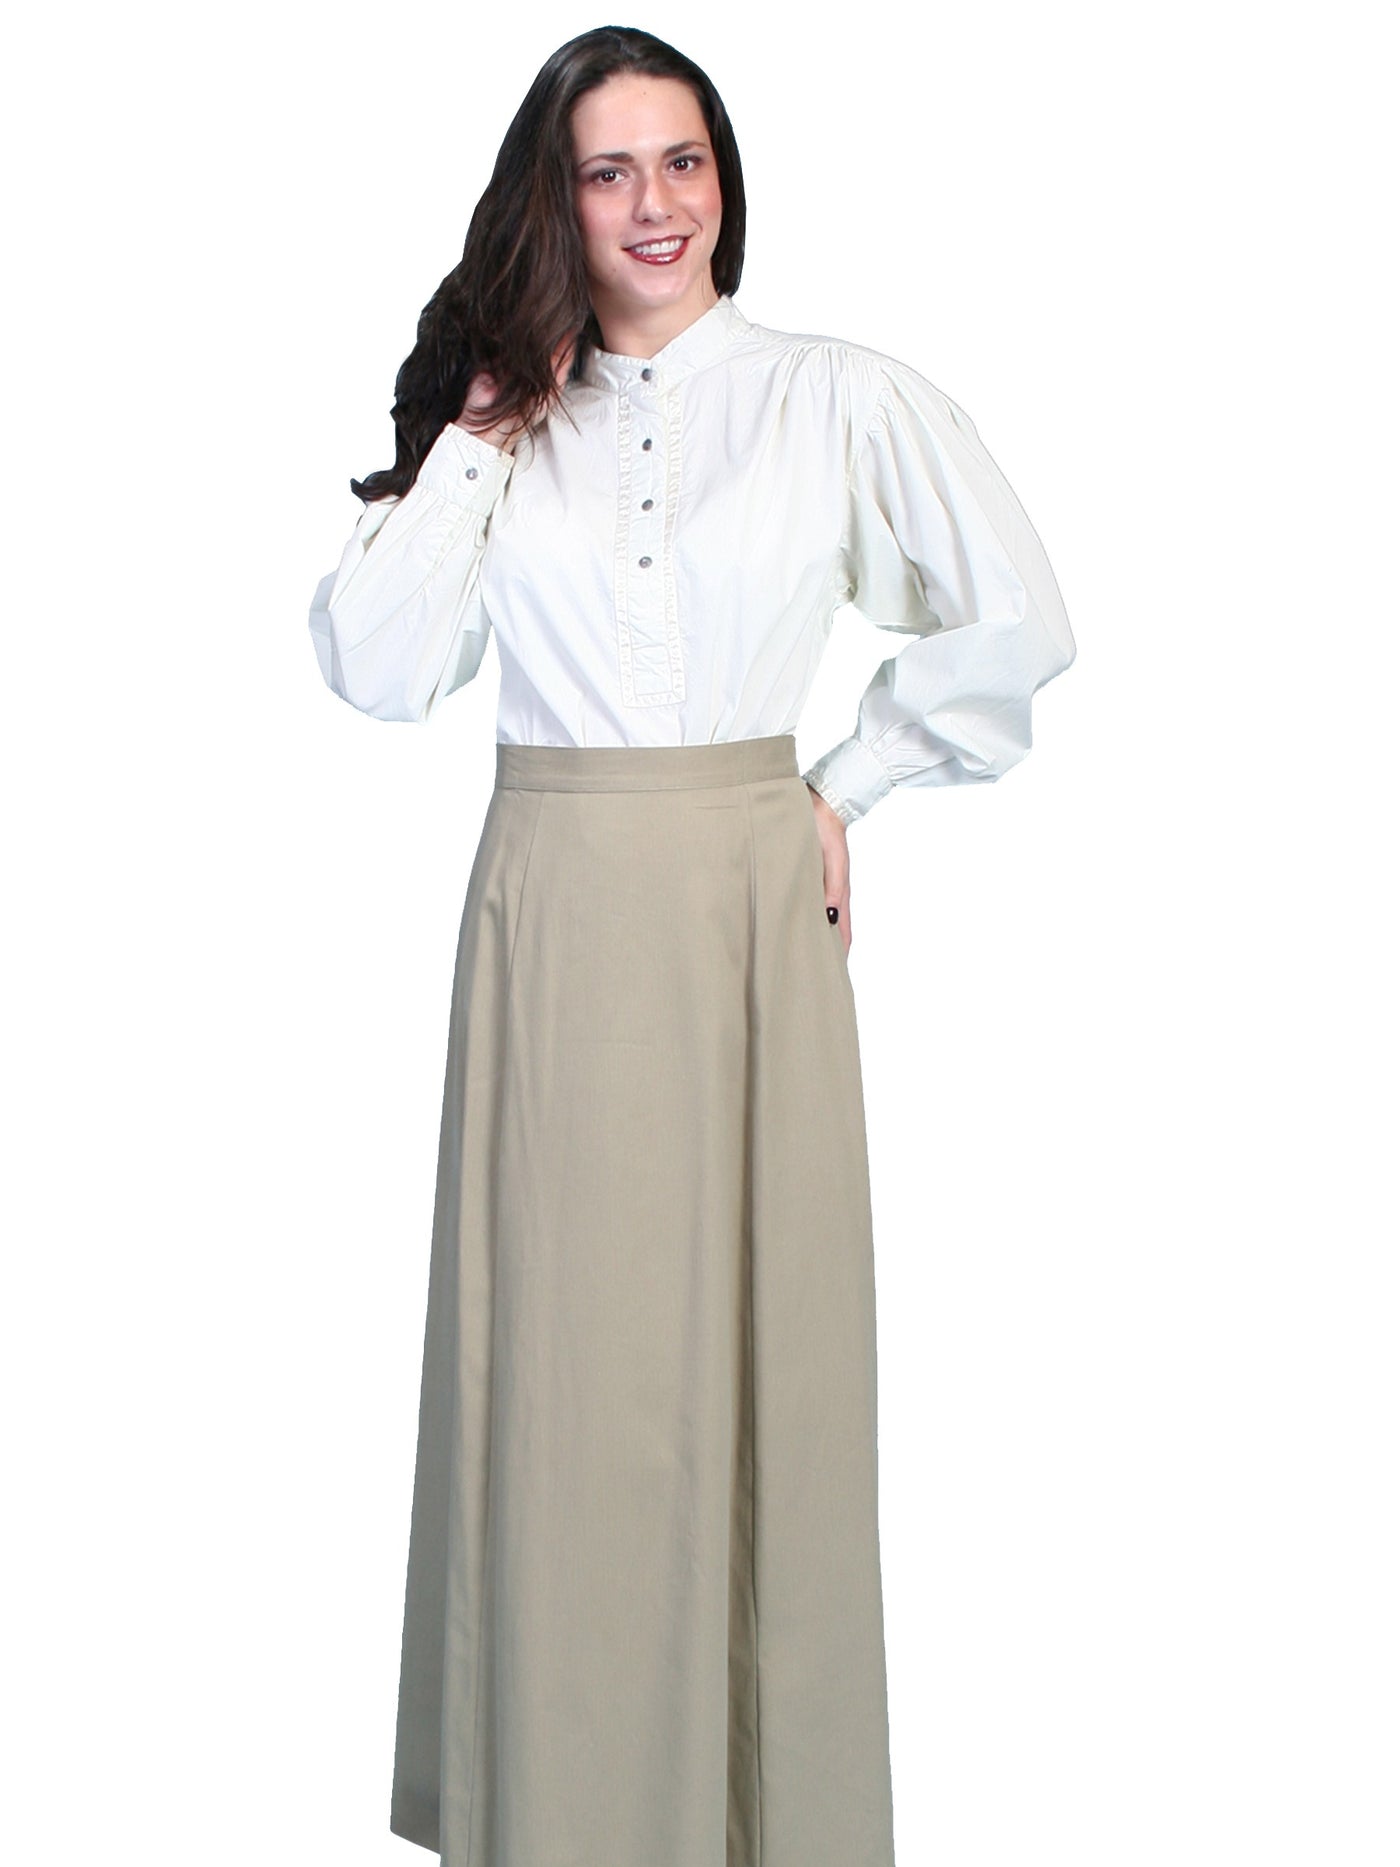 Classic Victorian Five Gore Skirt in Tan - SOLD OUT